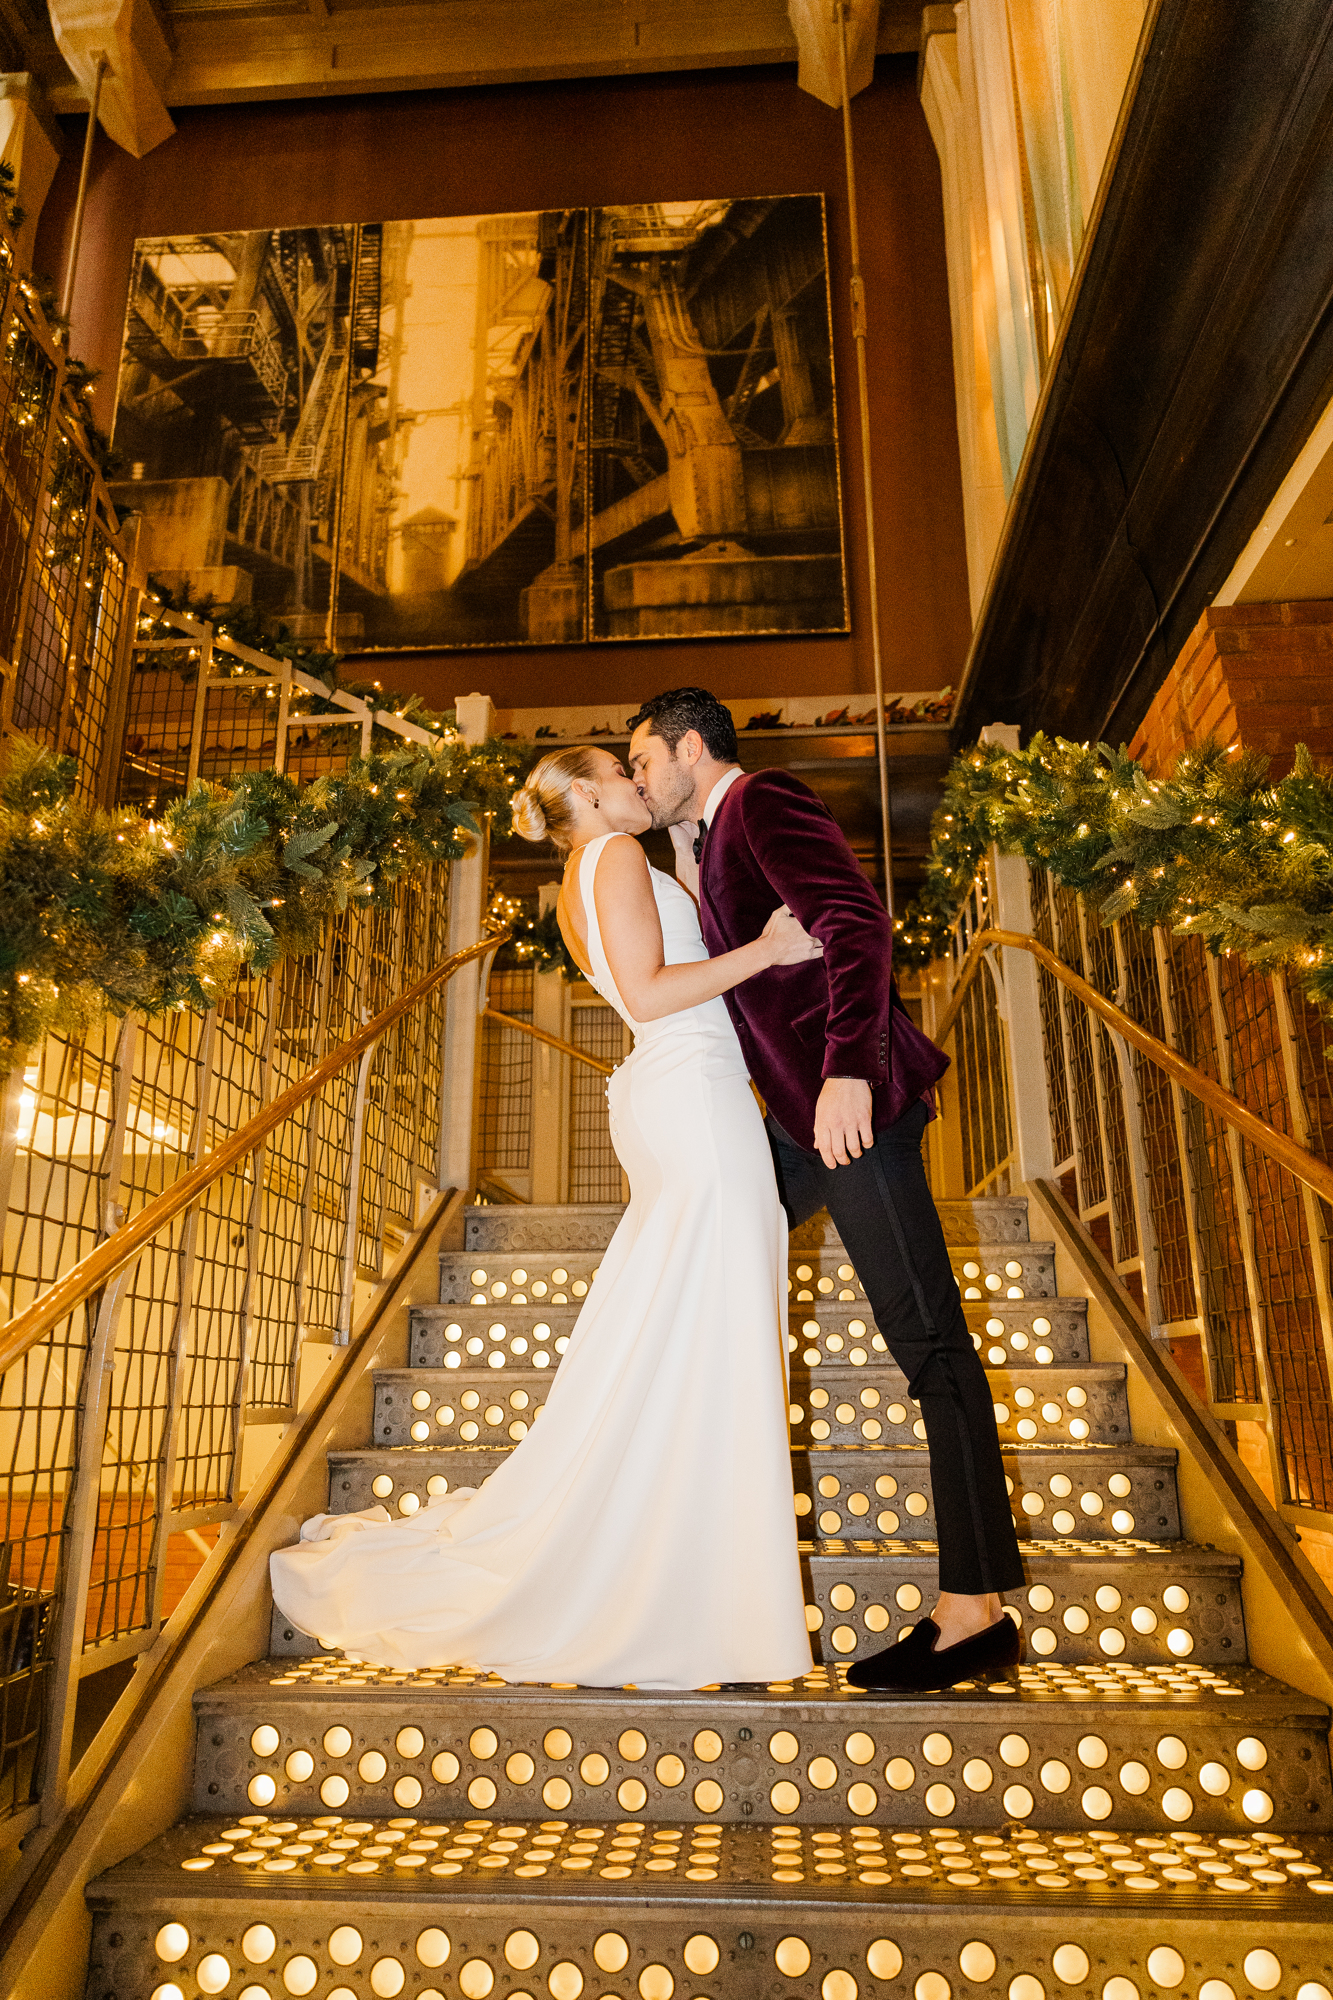 Magical New York Wedding Photography at City Winery